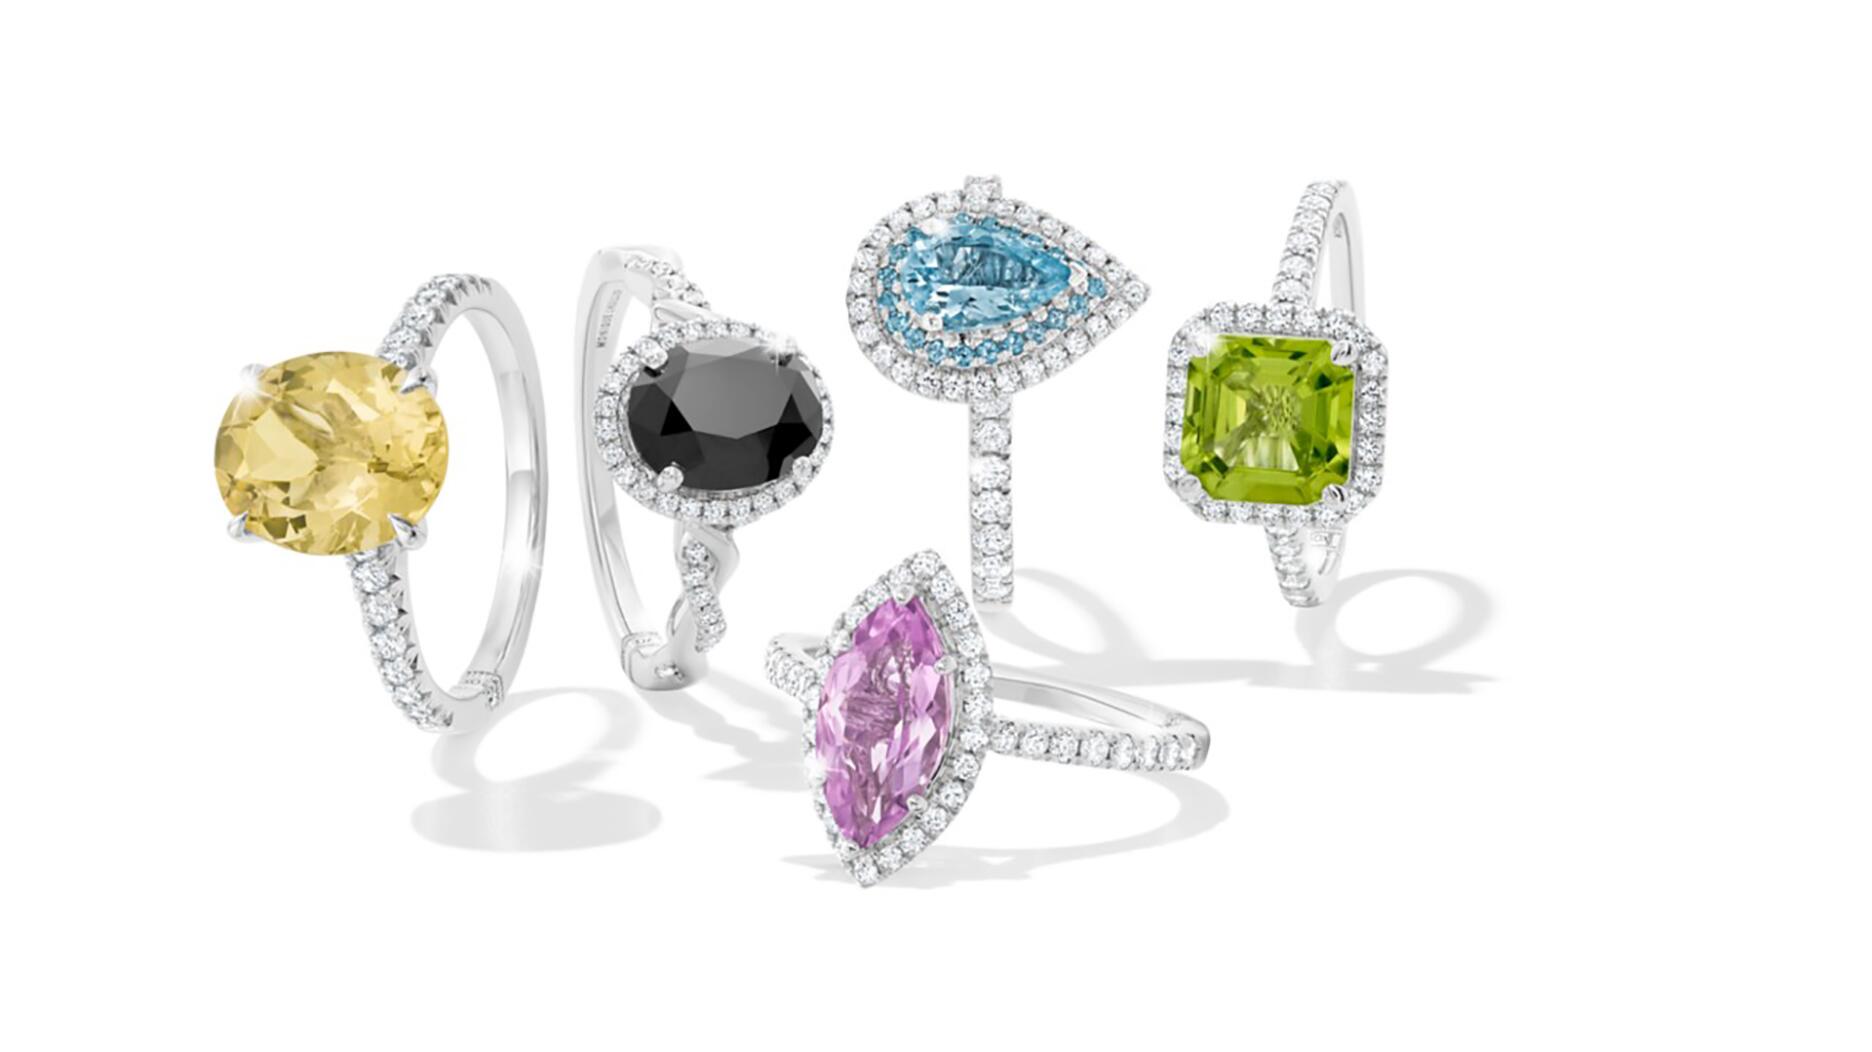 See Monique Lhuillier’s Colorful New Engagement Rings